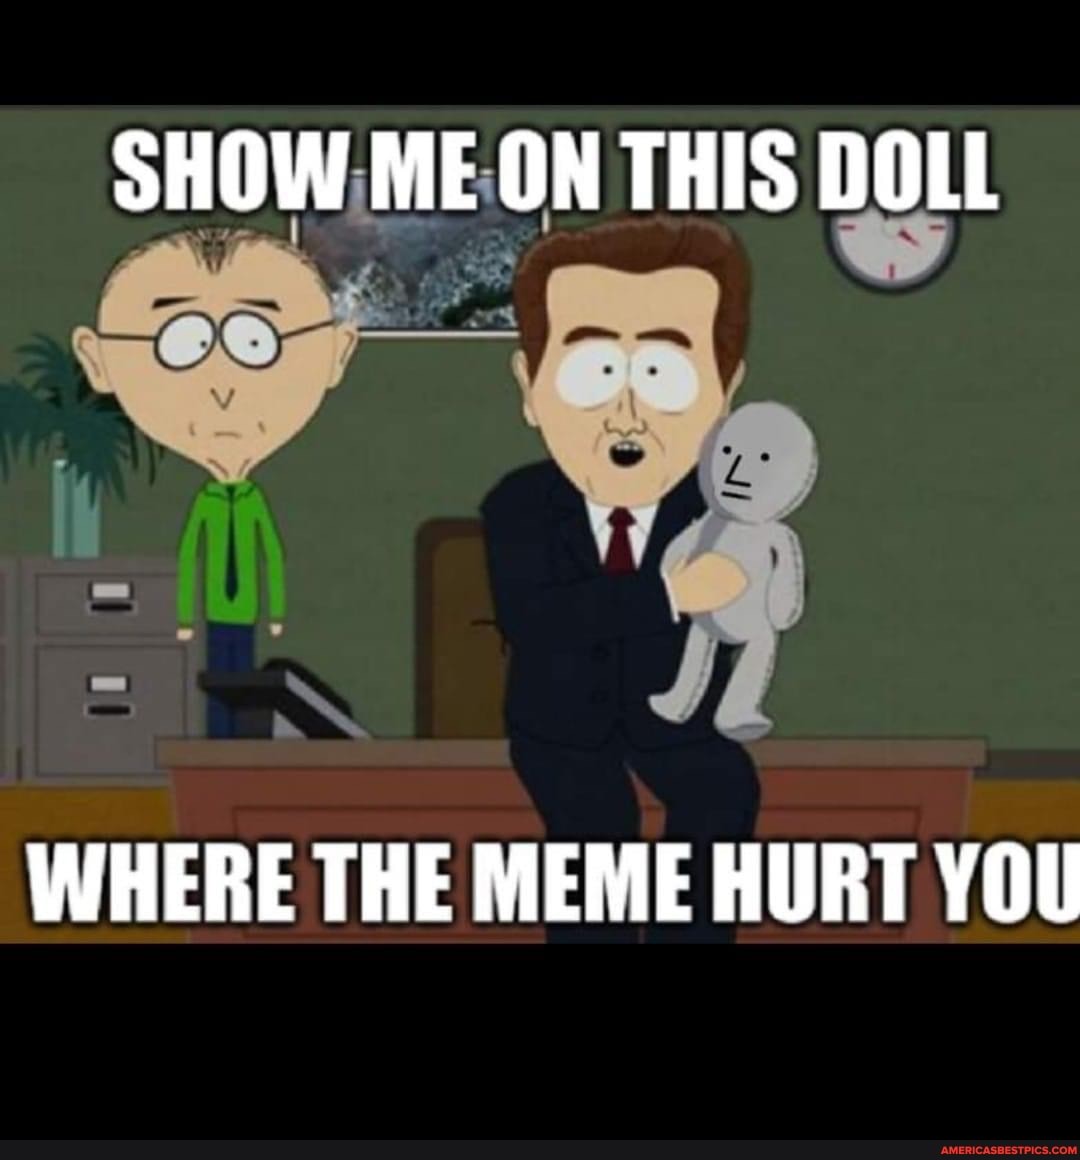 SHOW ME ON THIS DOLL WHERE THE MEME HURT YOU - America's best pics and  videos